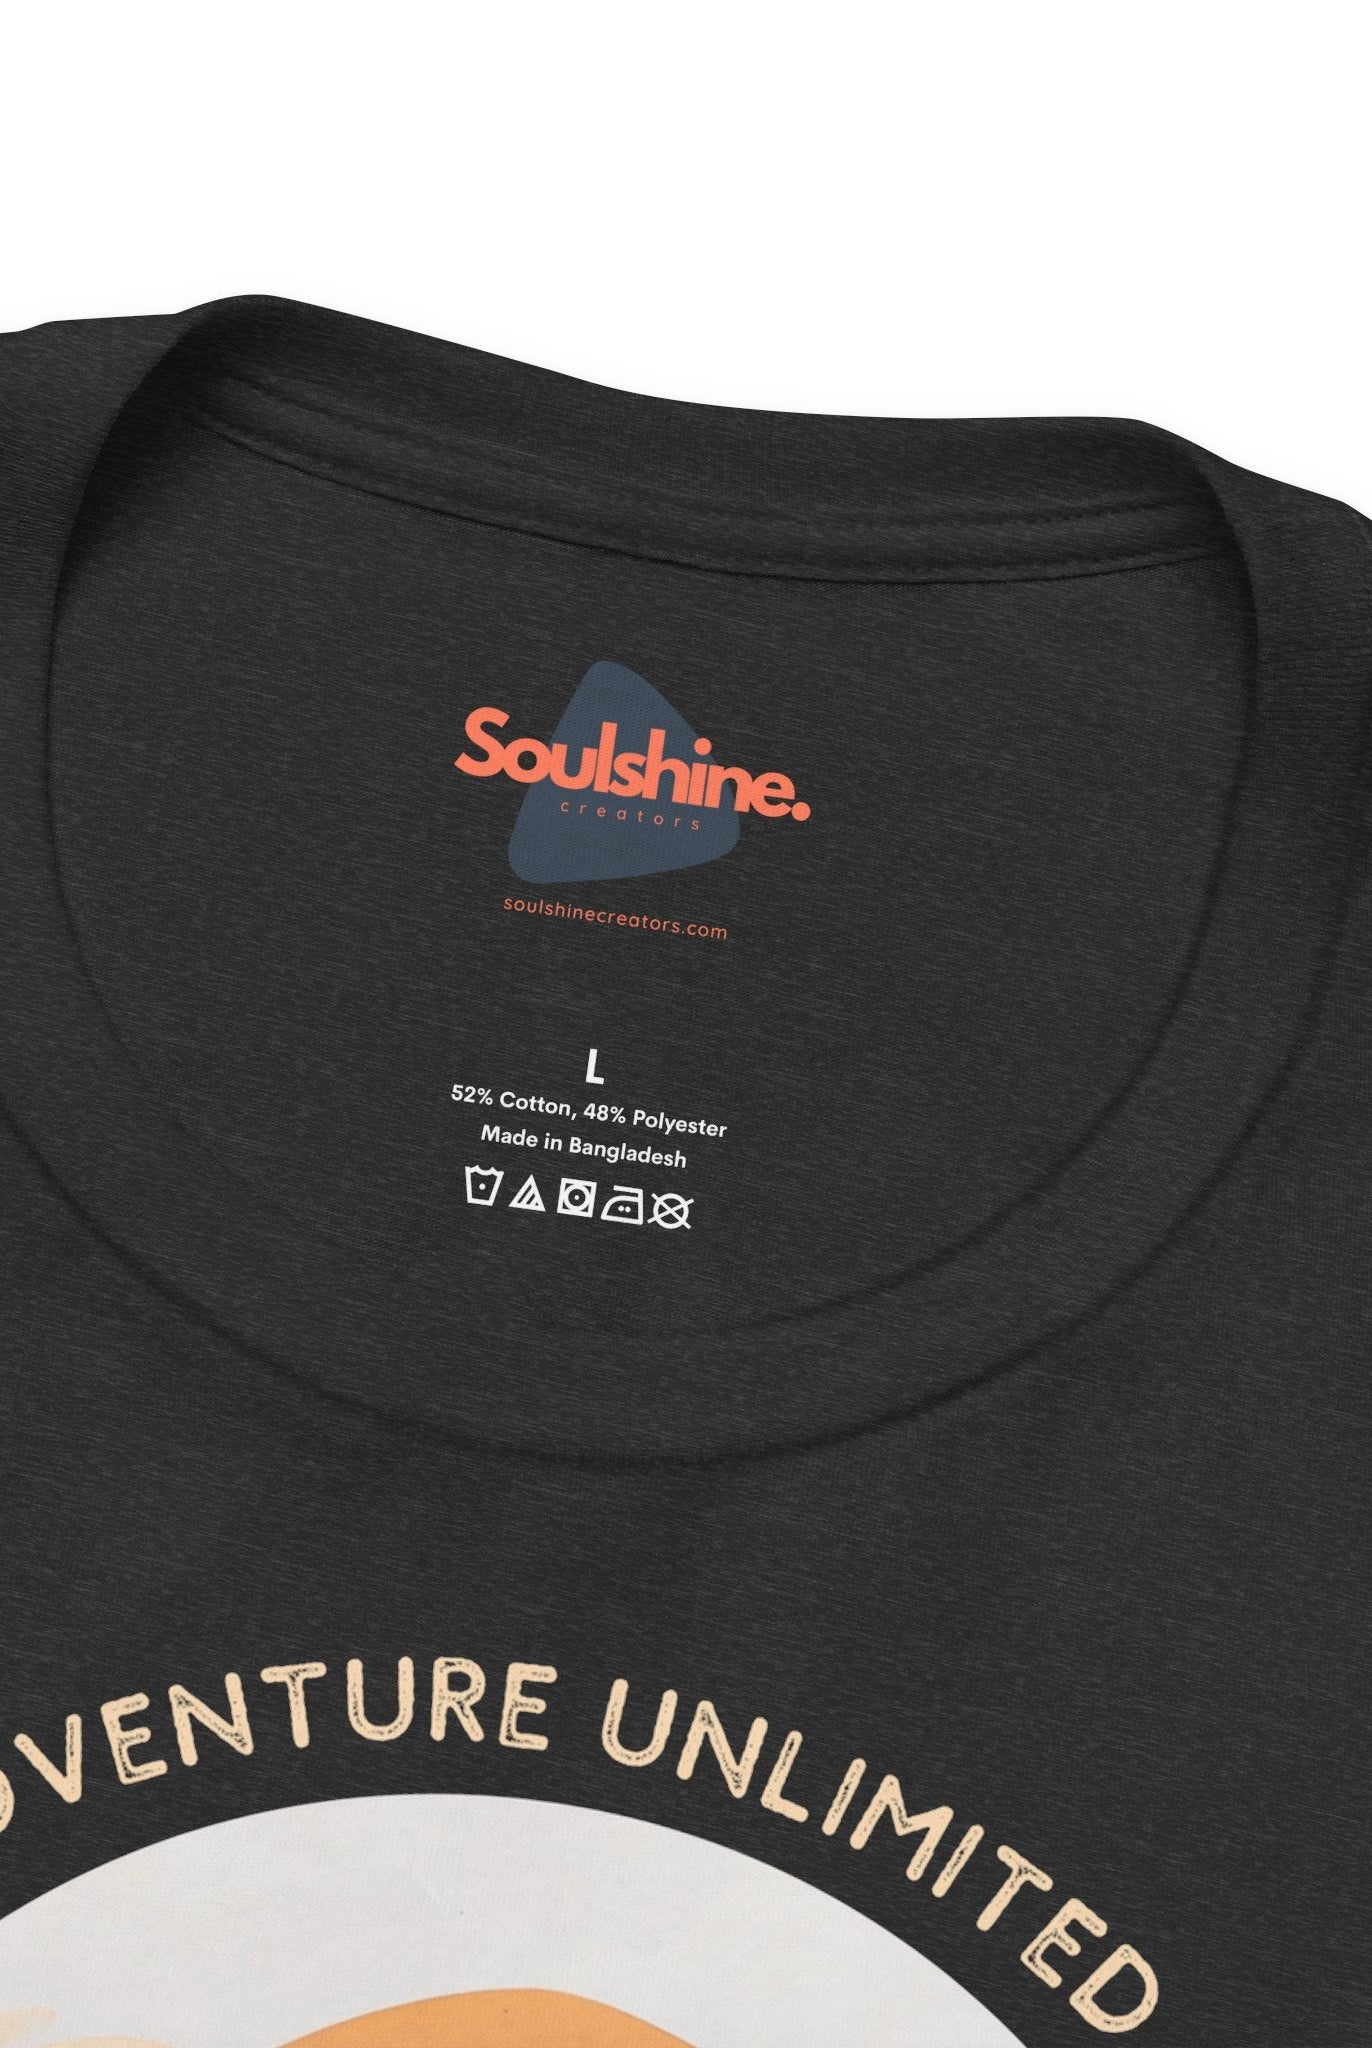 Adventure Unlimited surfing tee shirt on Bella & Canvas EU, direct-to-garment printed item